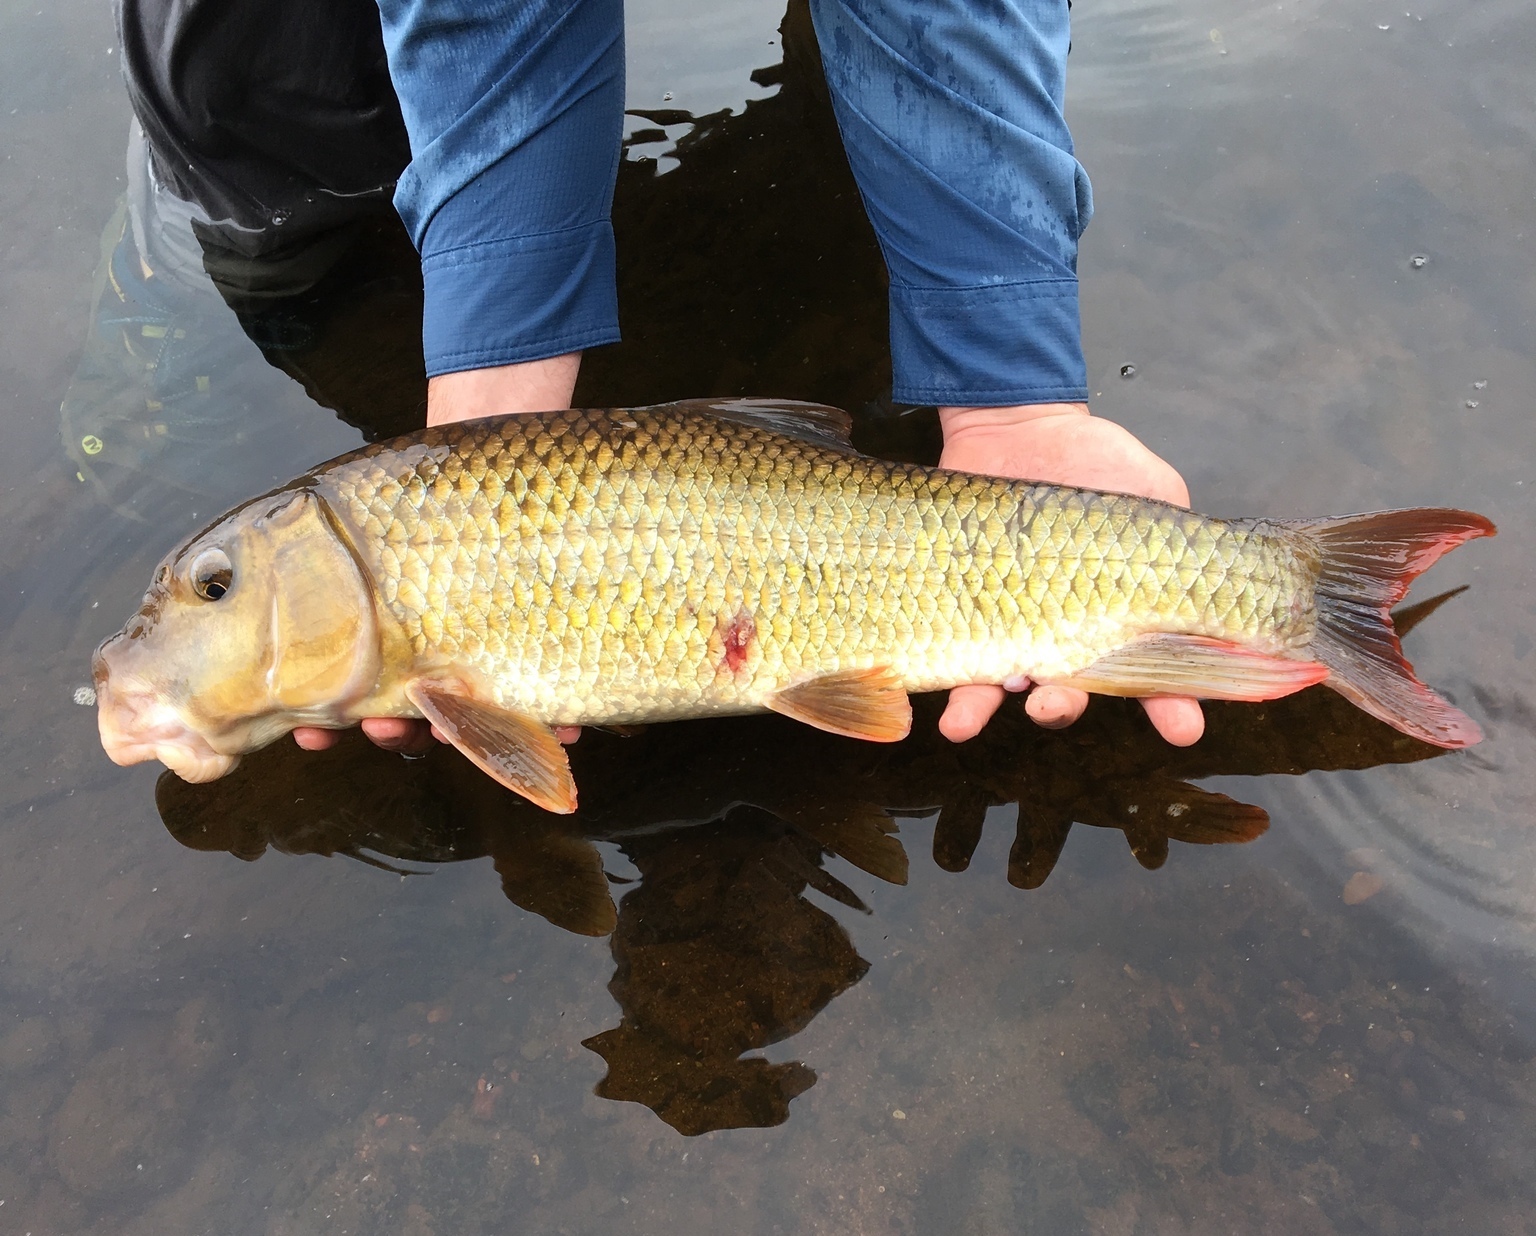 Minnesota lawmakers ask DNR to reconsider 'rough fish' – St. Croix 360